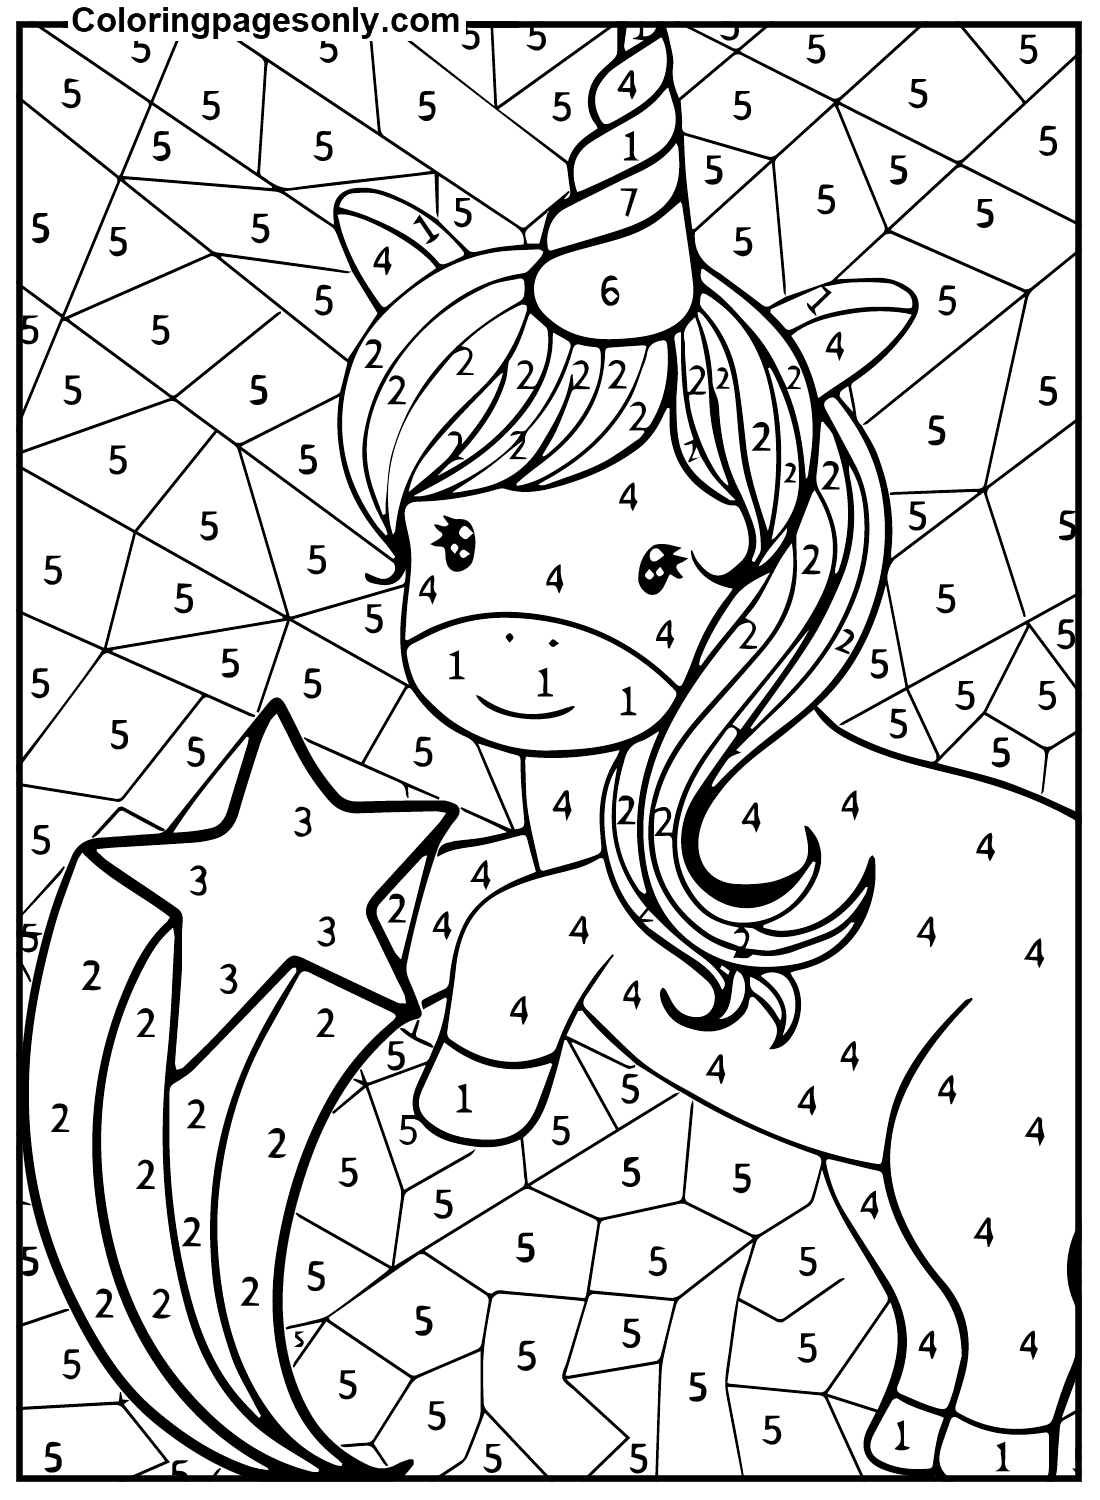 Unicorn Color By Number Printable from Unicorn Color By Number